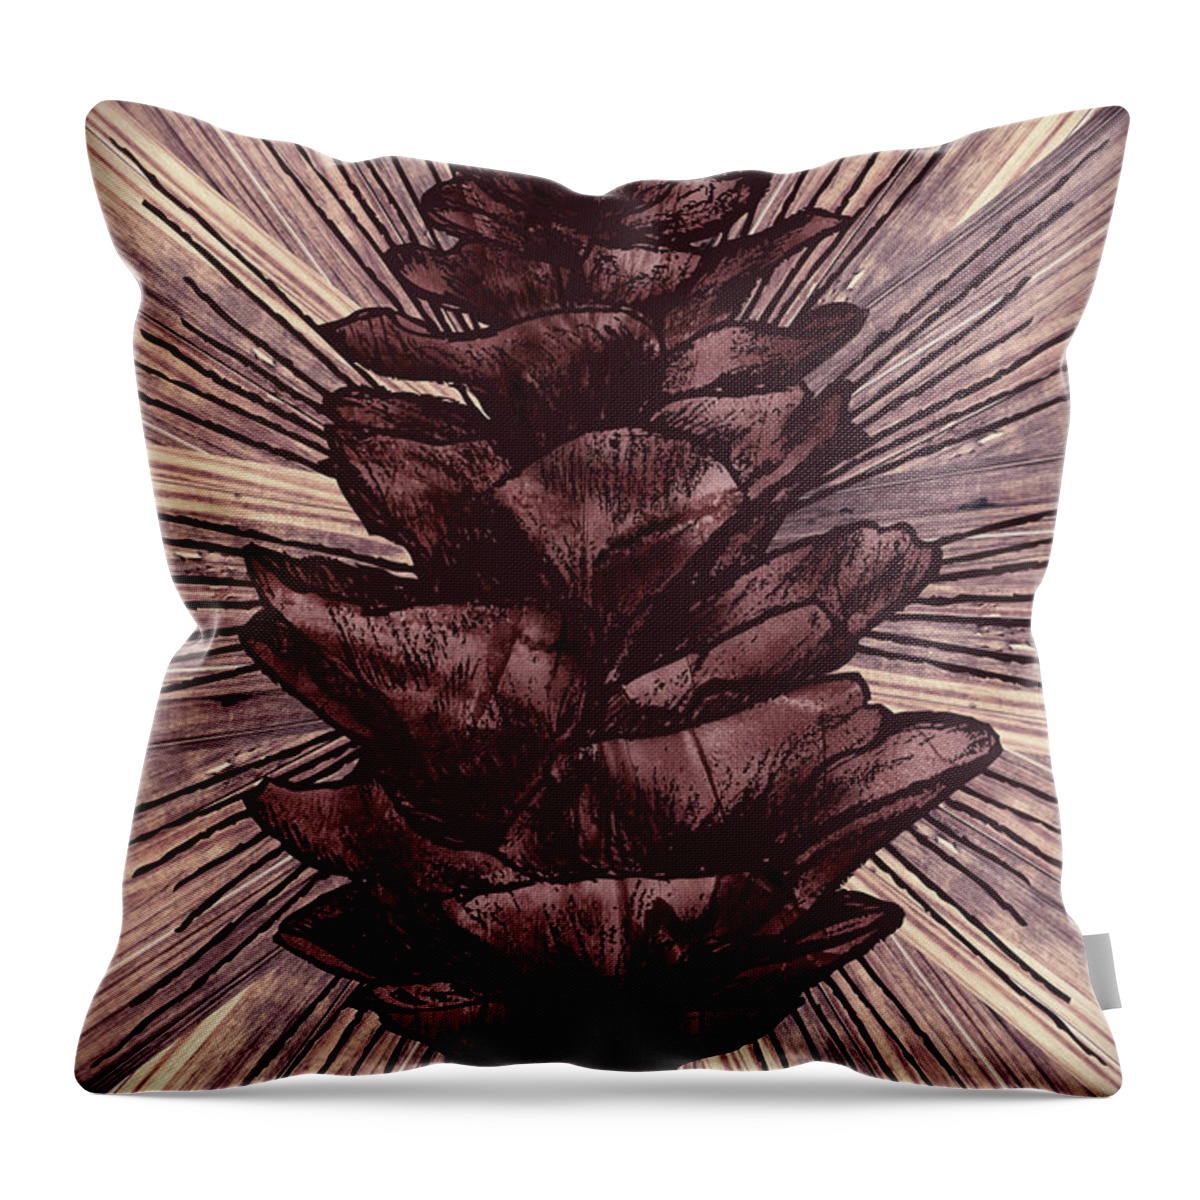 Spruce Throw Pillow featuring the digital art Spruce I by April Moen